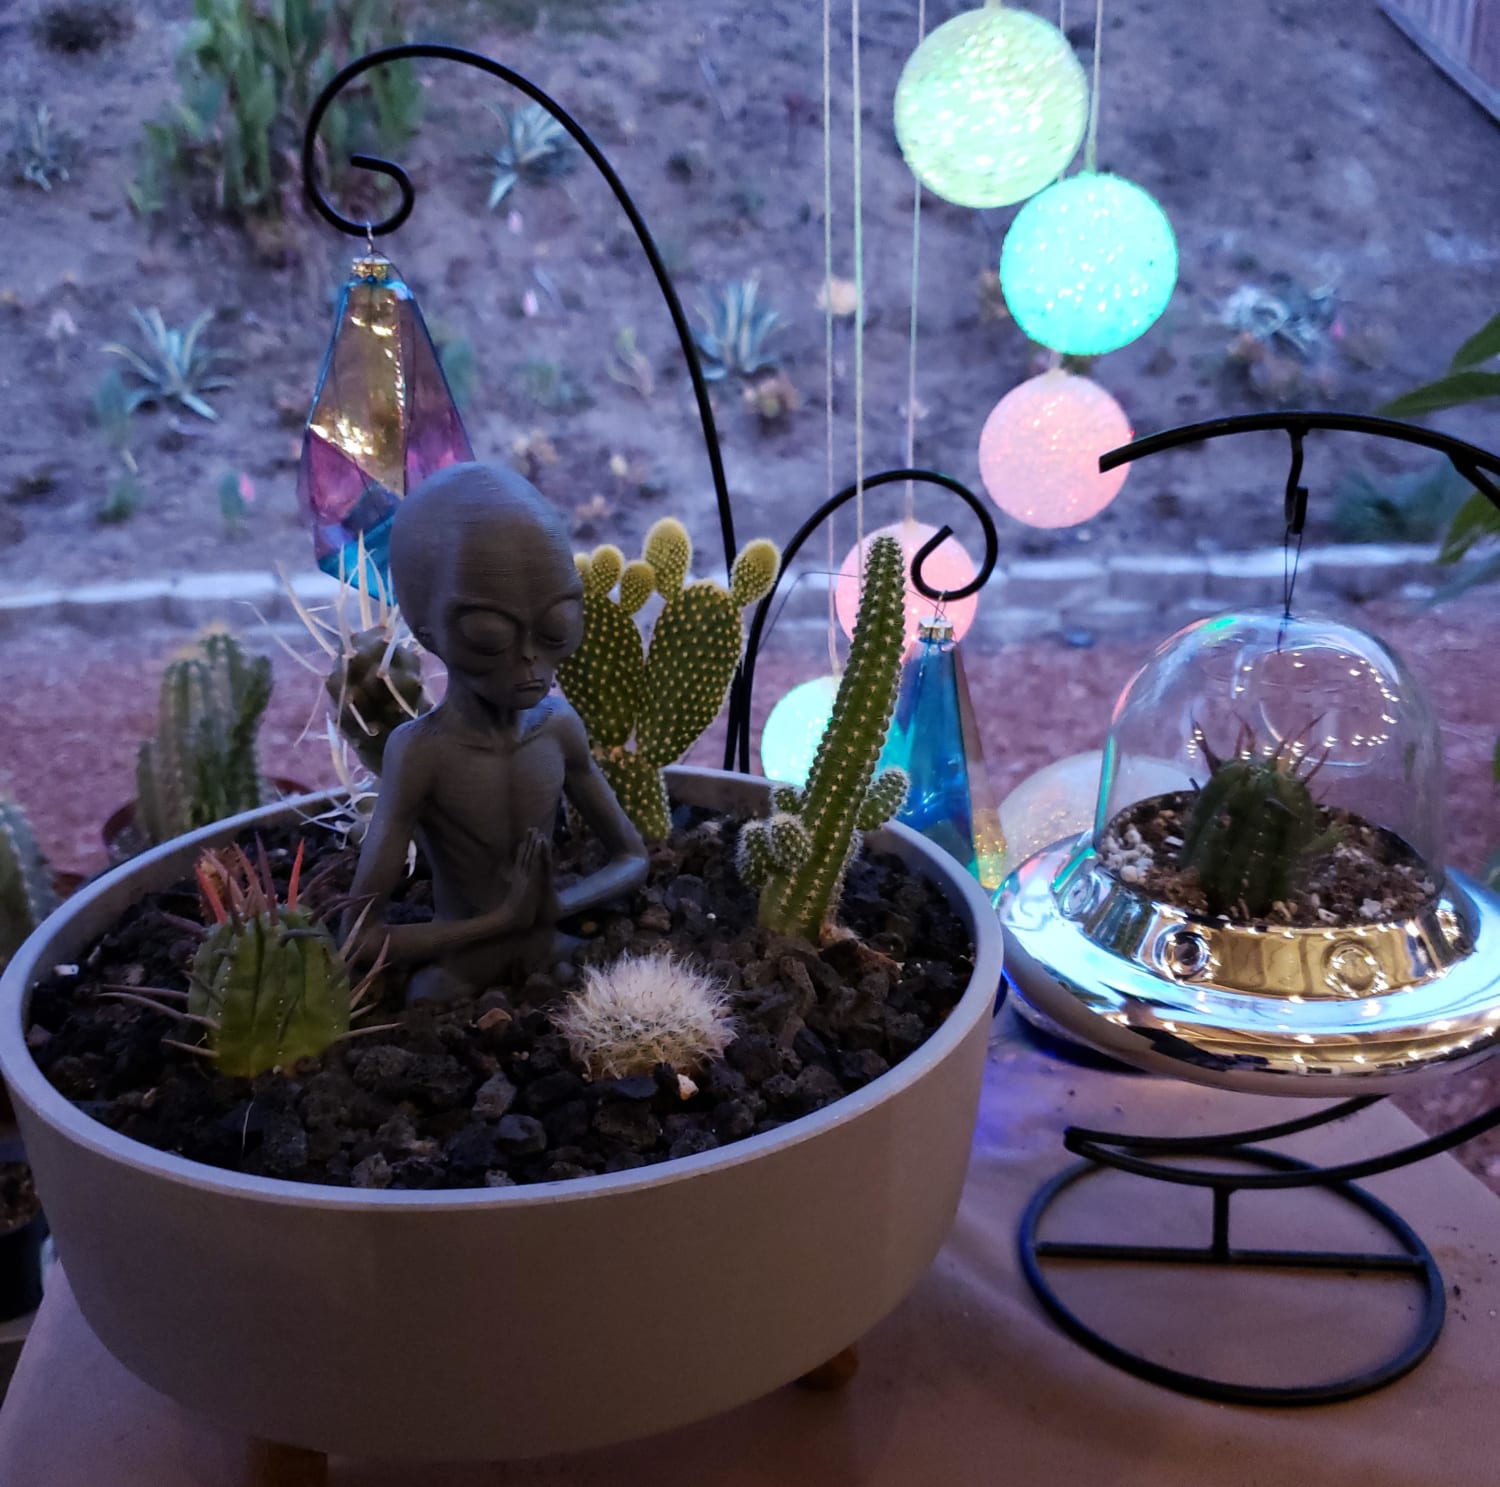 Thought you guys might enjoy seeing how much the alien pot has grown!! He also has a new friend in a blown glass UFO.